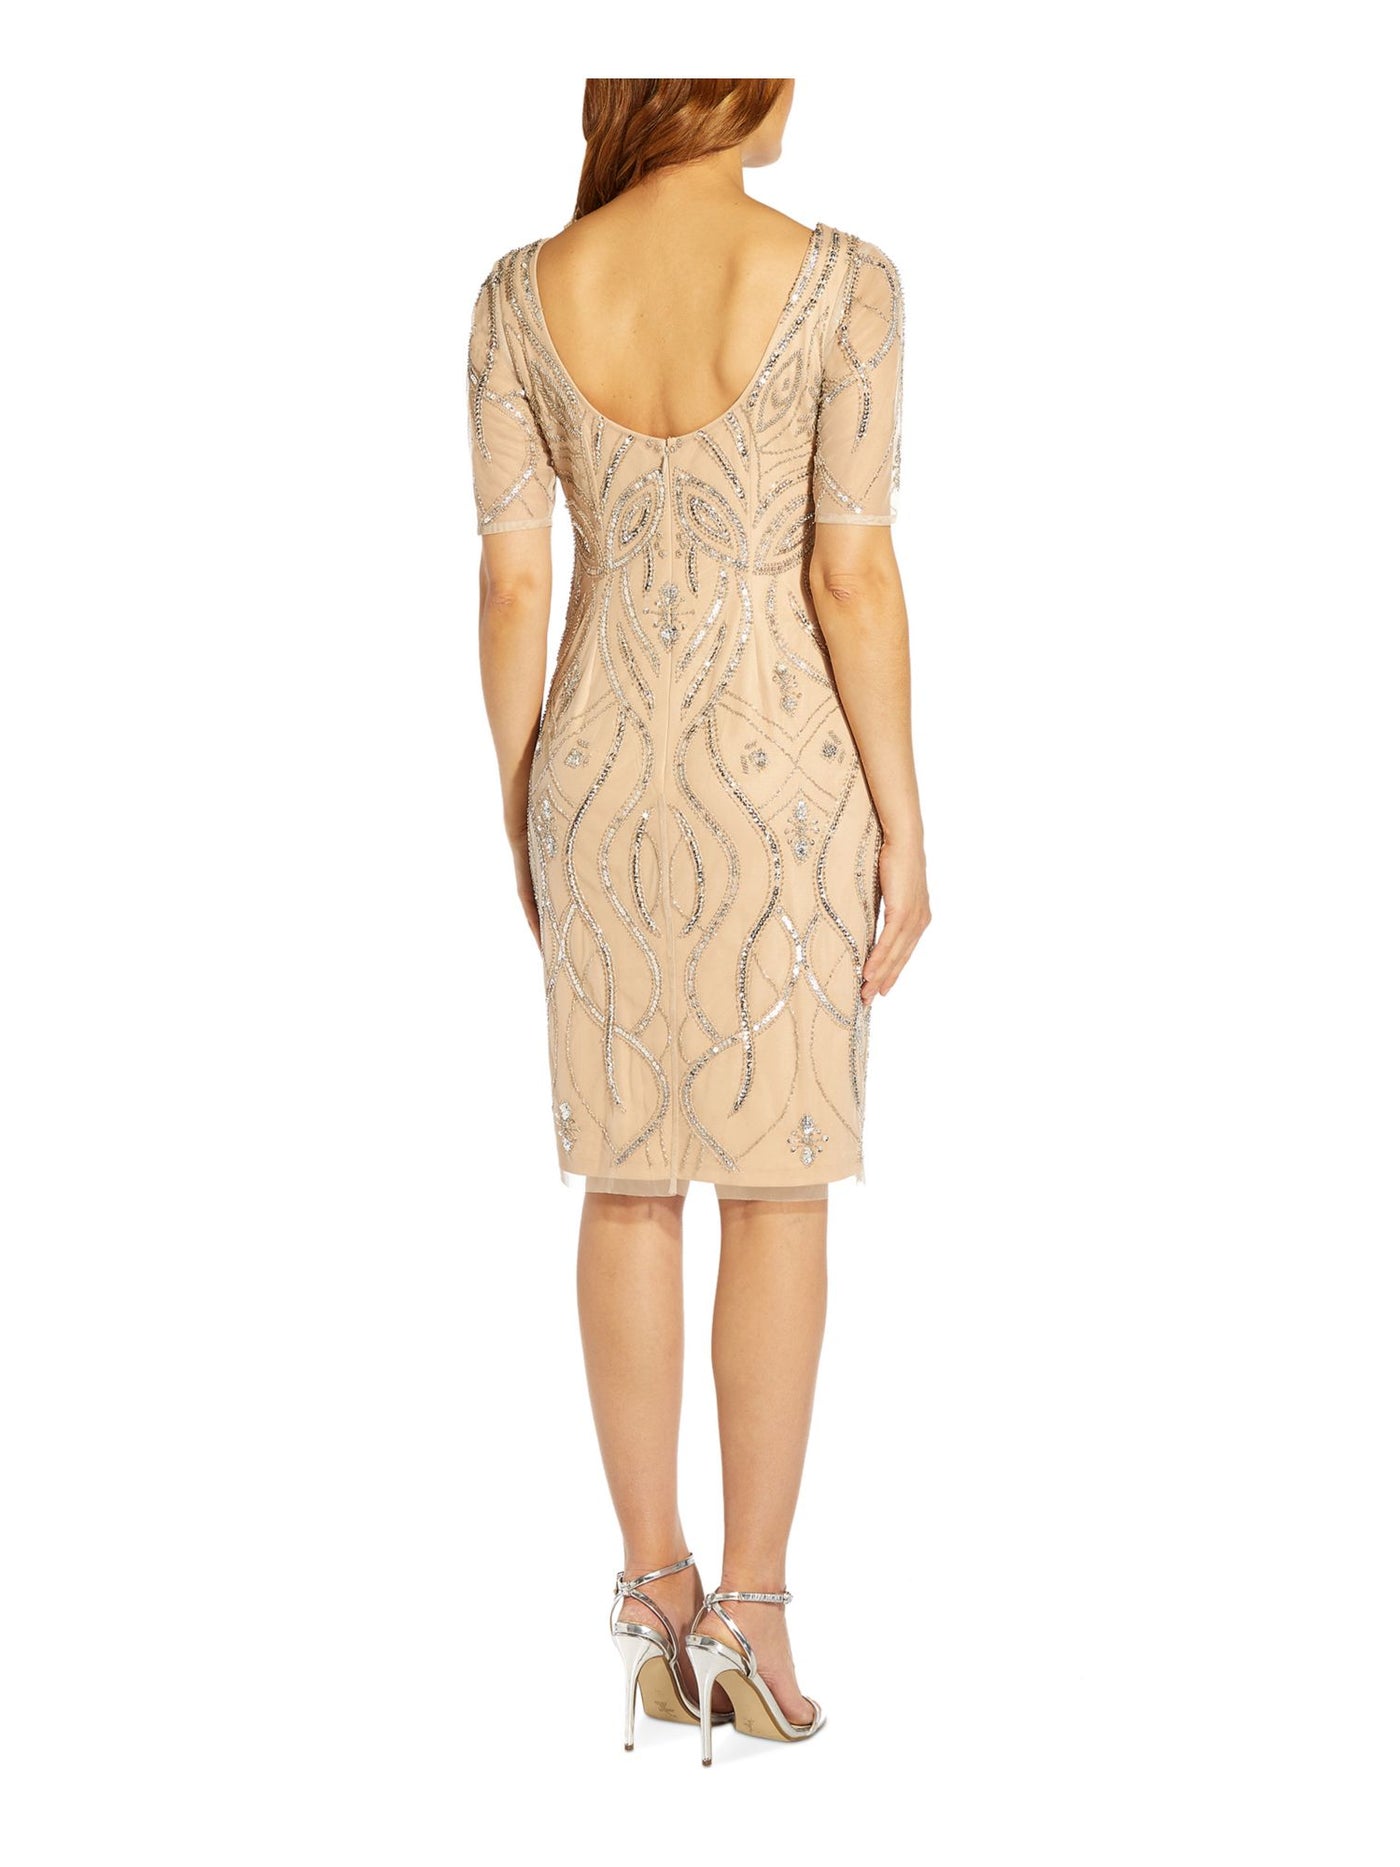 ADRIANNA PAPELL Womens Beige Zippered Lined Elbow Sleeve Round Neck Above The Knee Cocktail Sheath Dress 4